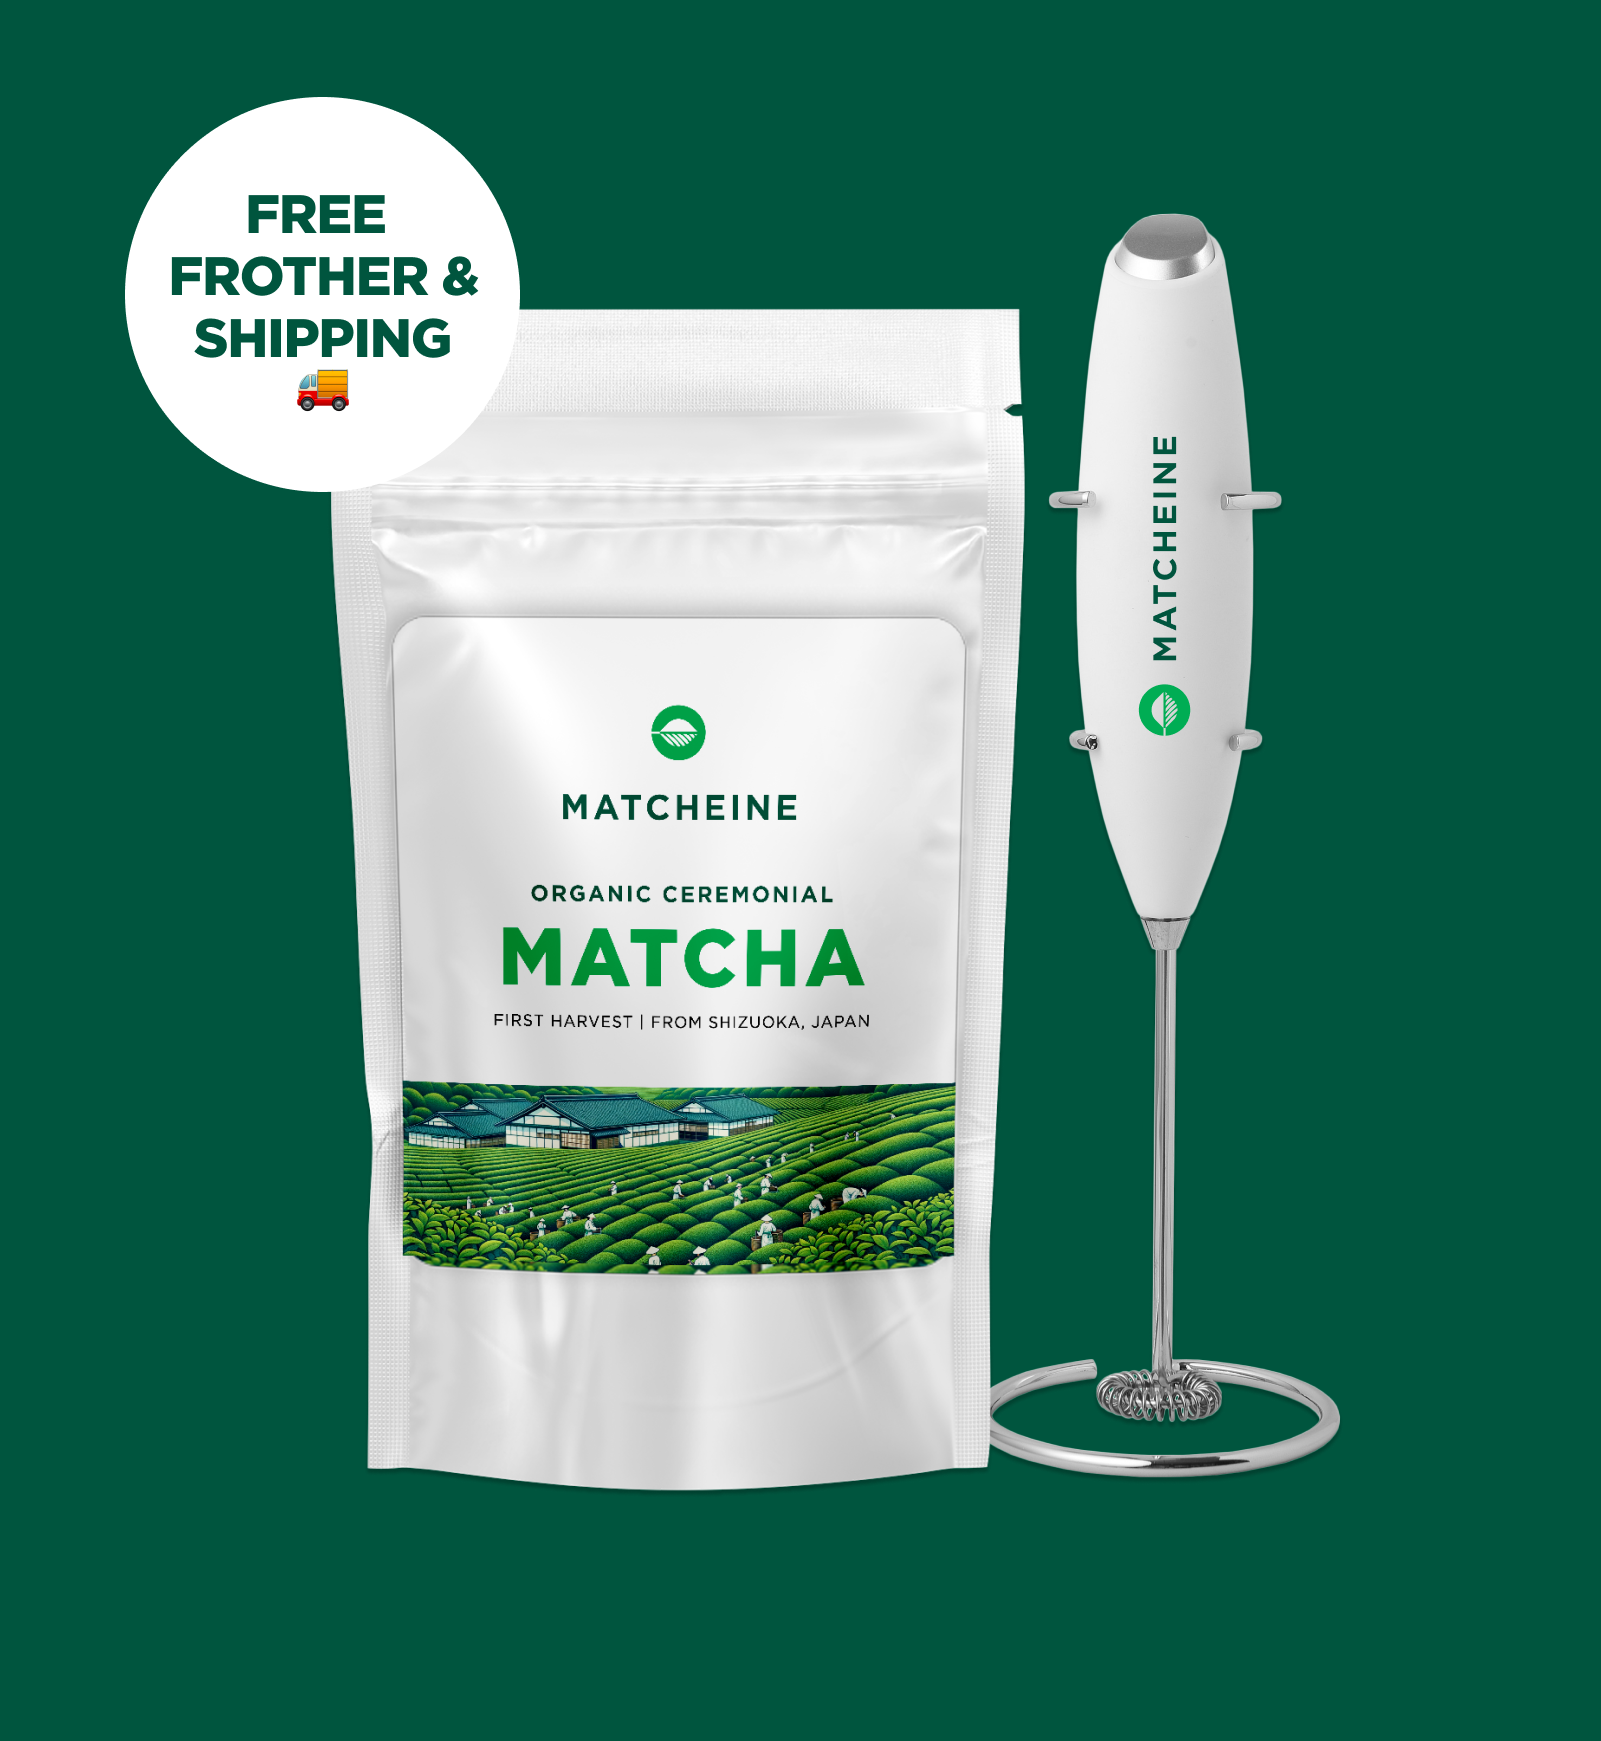 Starter Kit - Ceremonial Matcha & FREE Frother